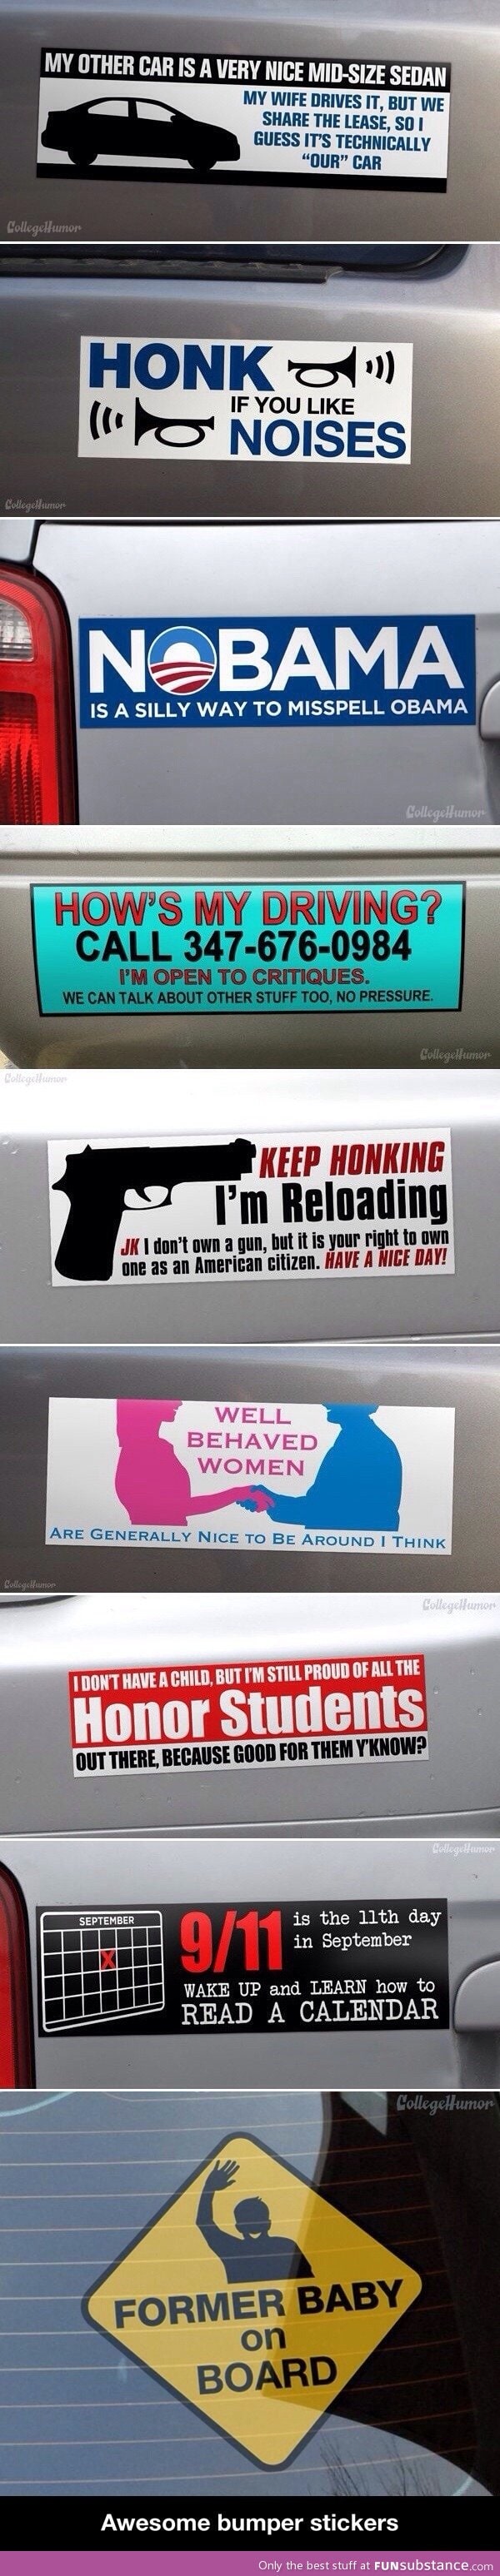 Awesome bumper stickers